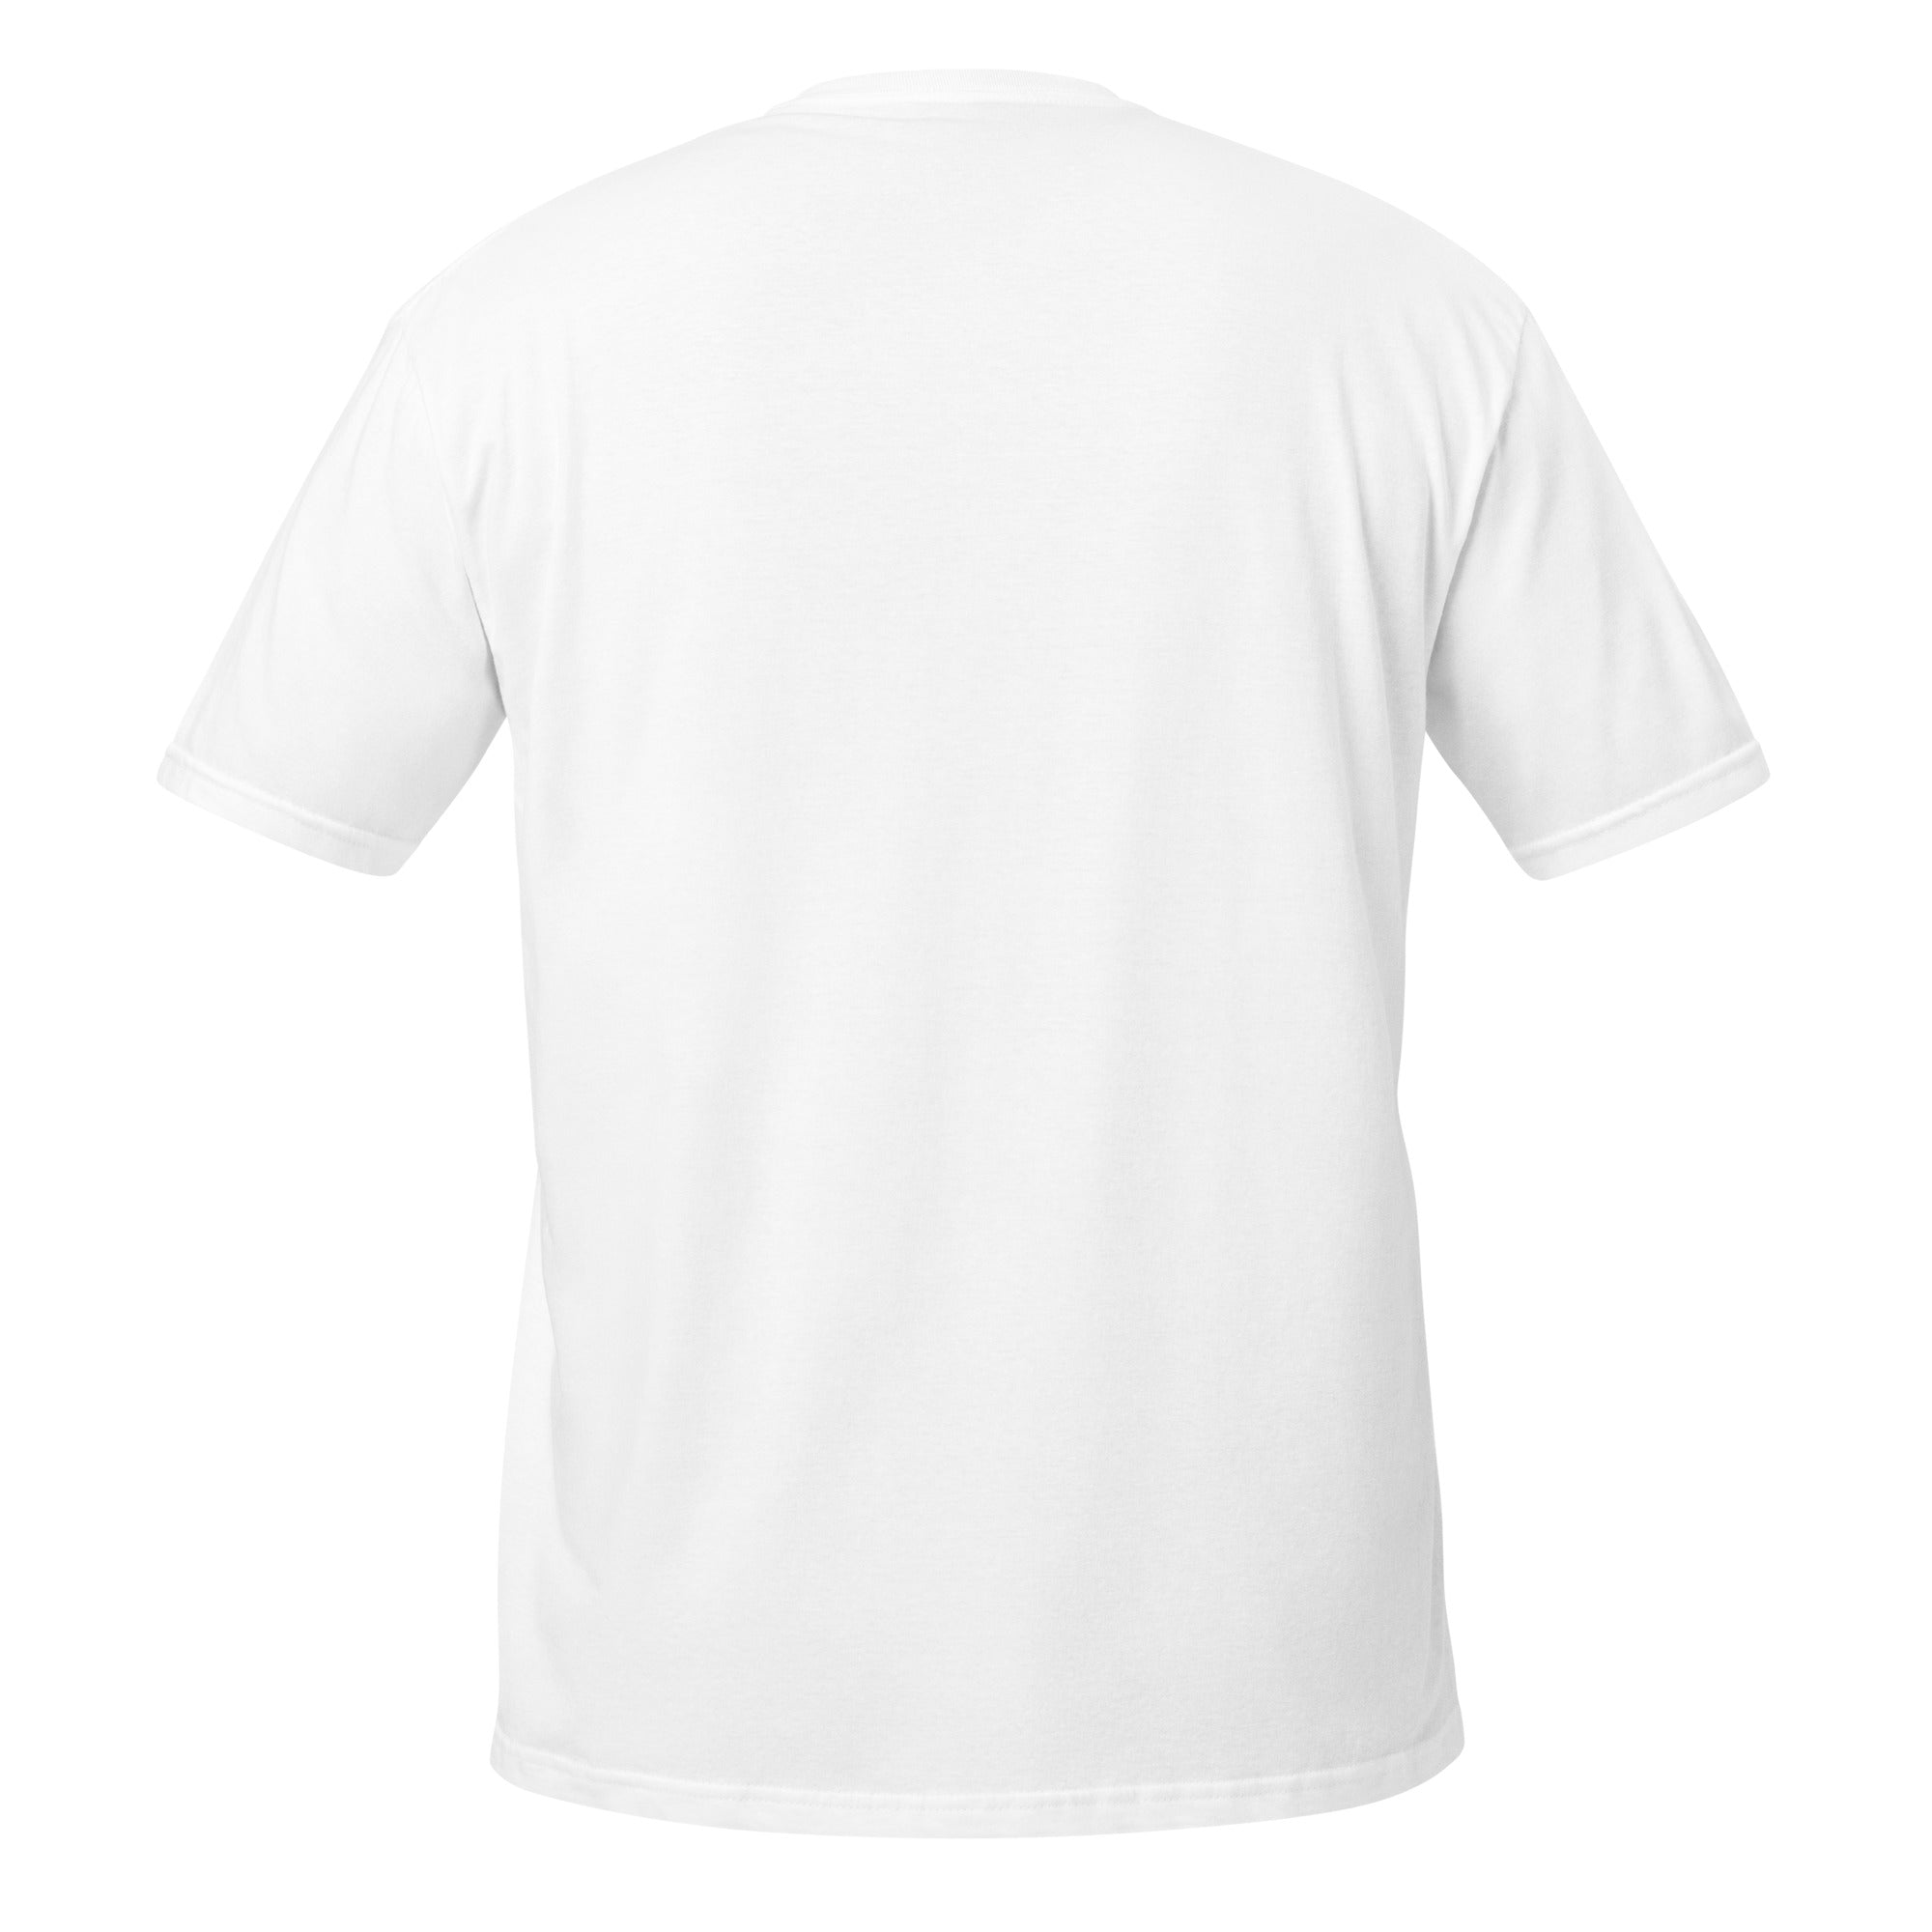 Short-Sleeve Unisex T-Shirt- It's a great day to be gay